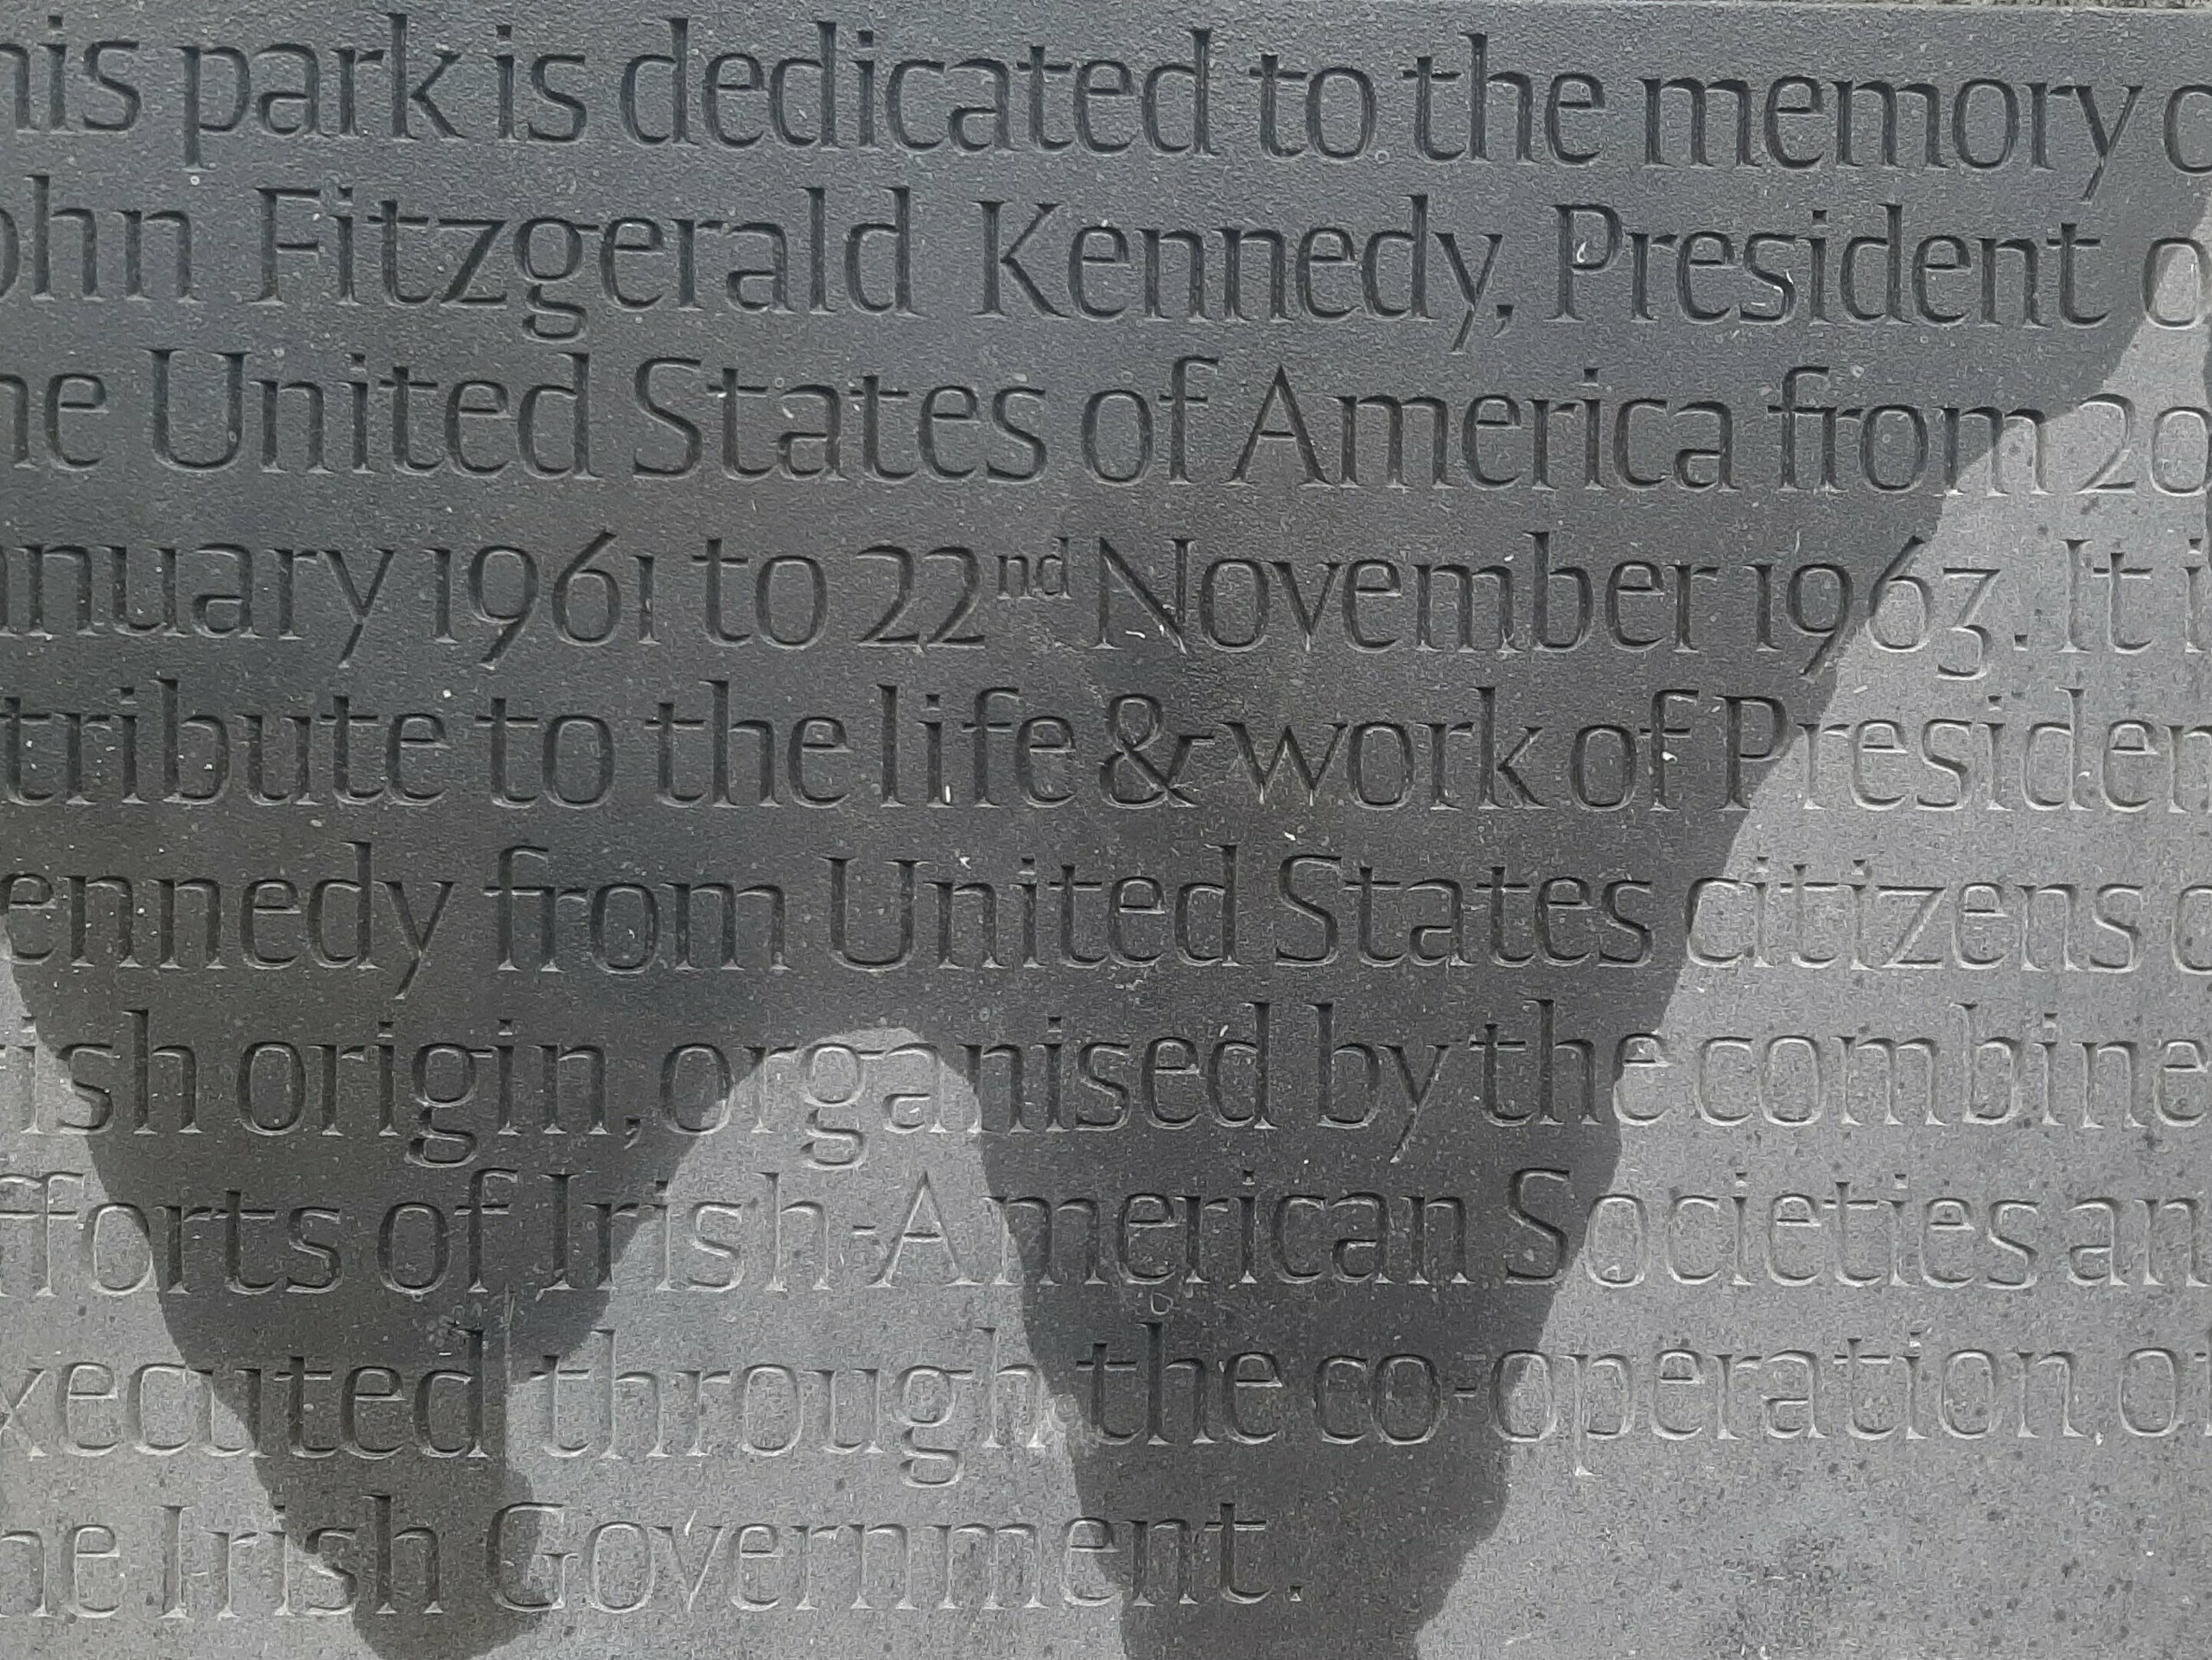 Memorial stone in the John F. Kennedy Aborteum which explains the importance of the park as a memorial.